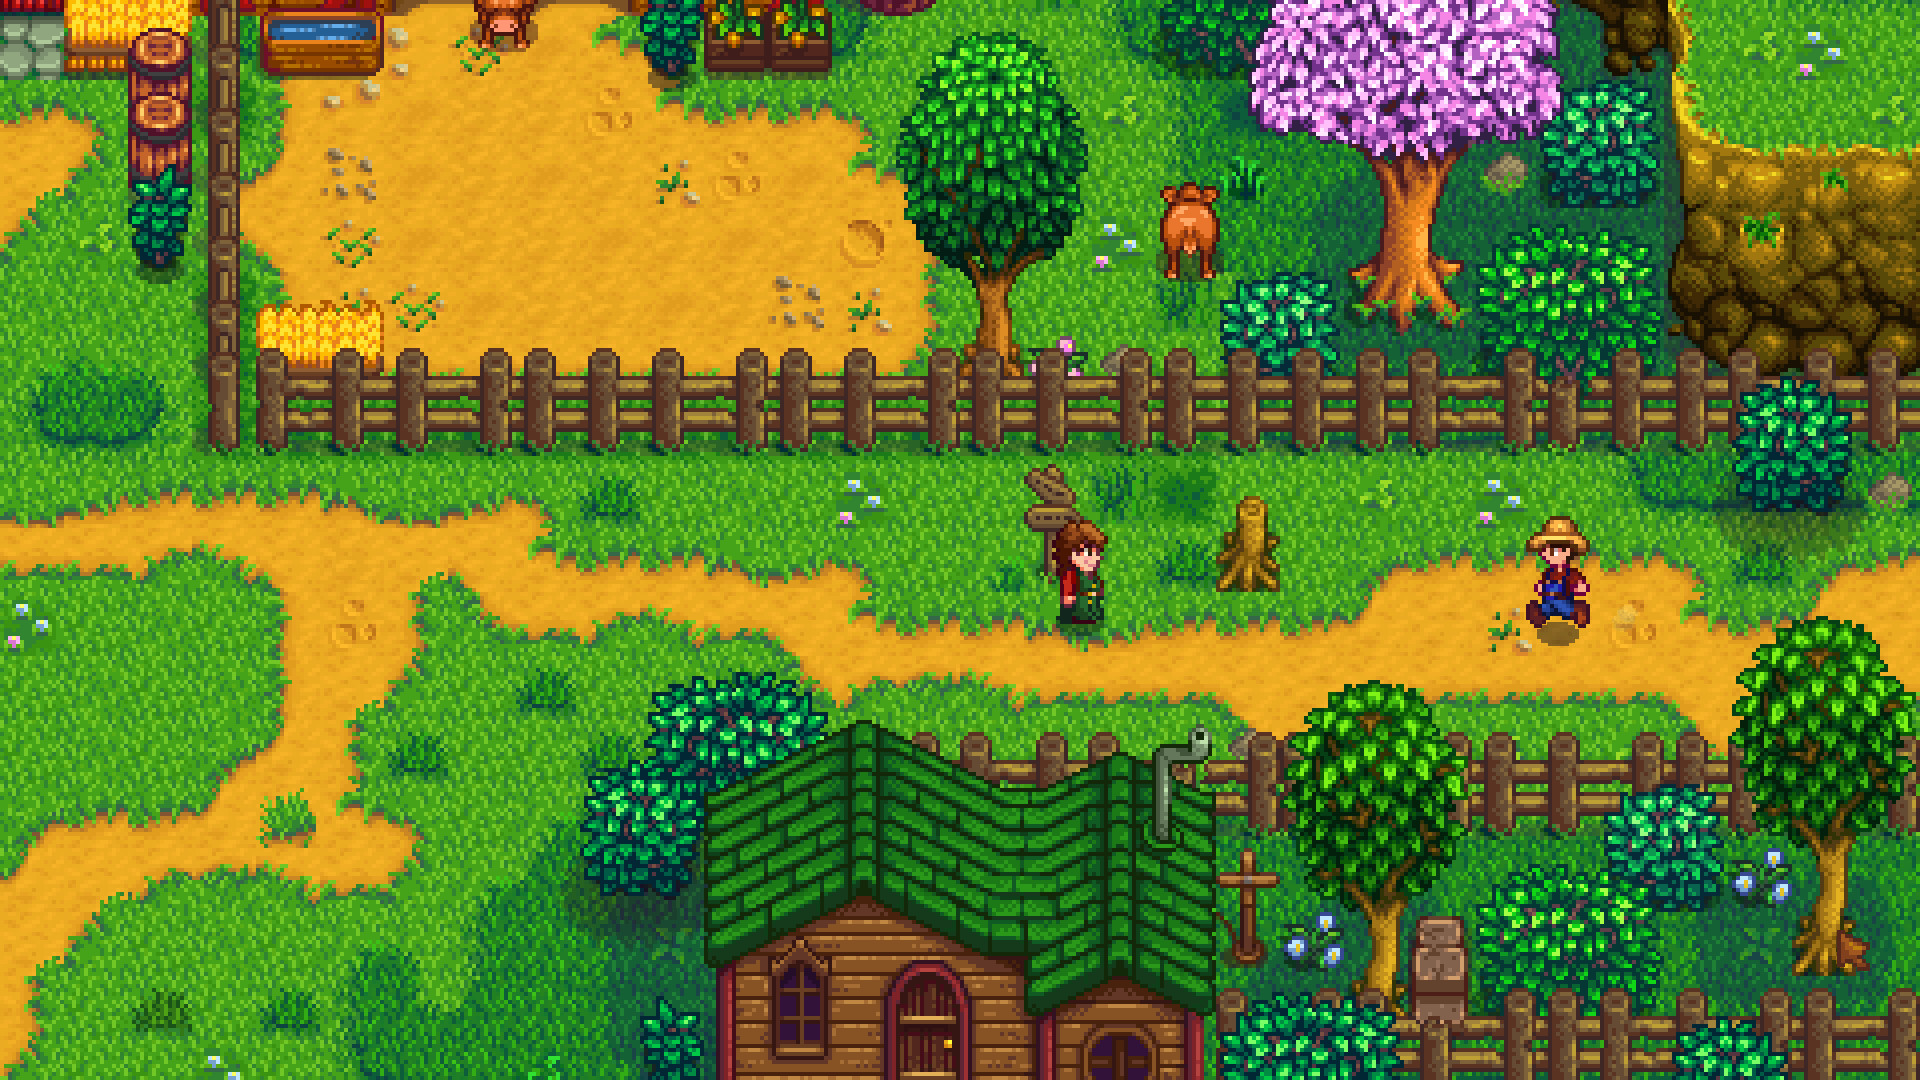 Stardew Valley 1.5.5 improves mod support, and 